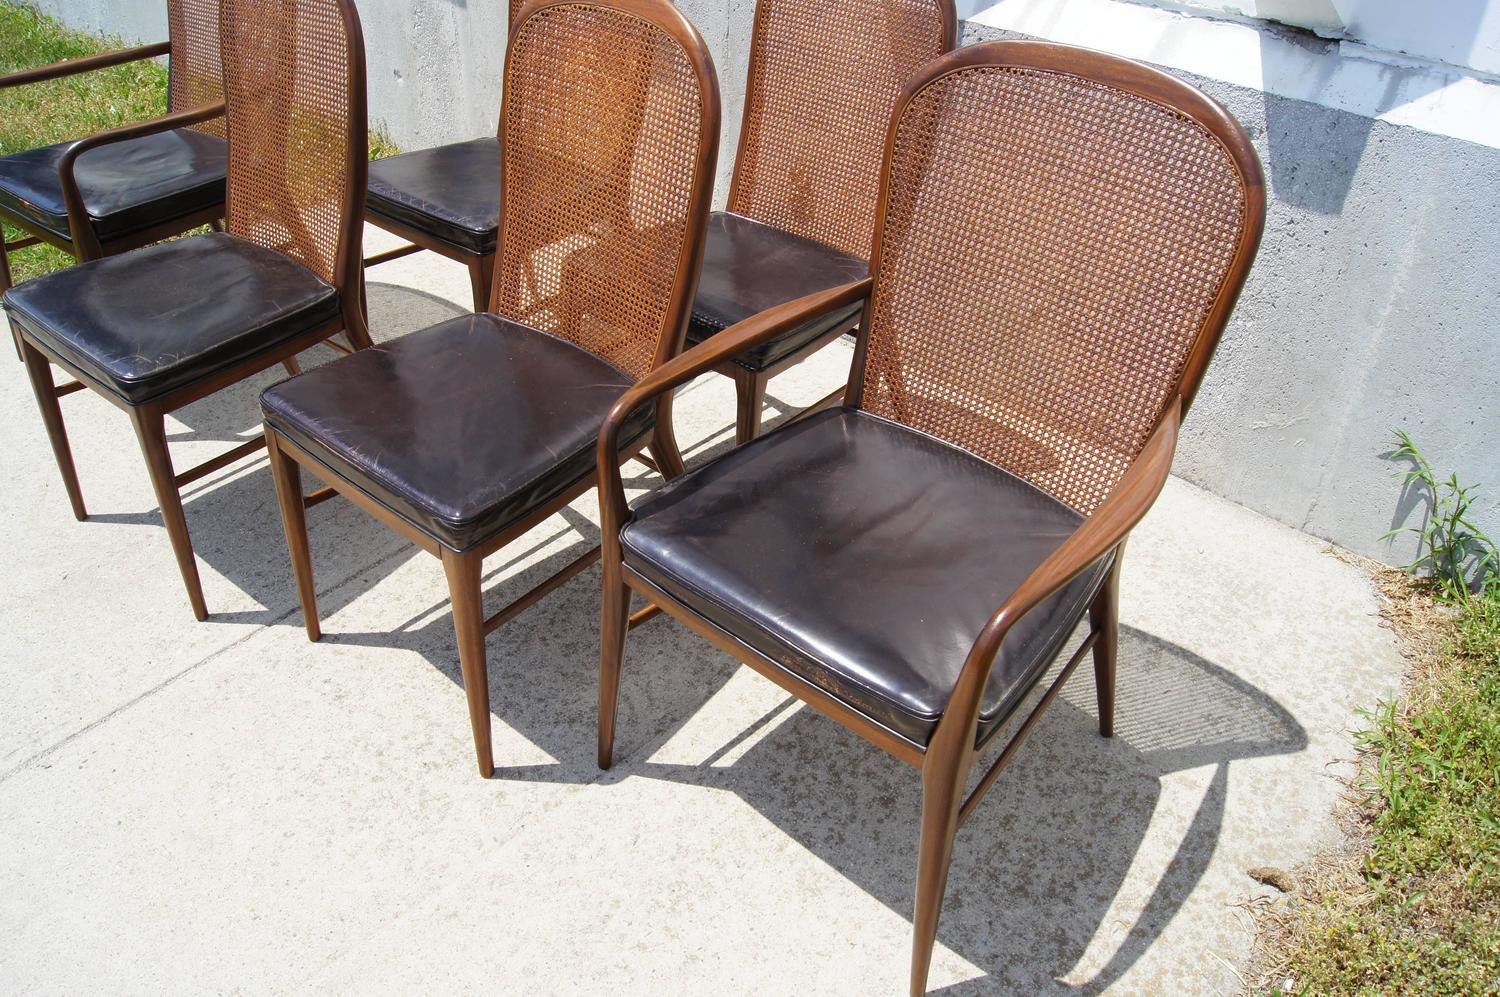 Rare Set Of Cane Dining Chairs By Paul Mccobb For H Sacks At 1stdibs